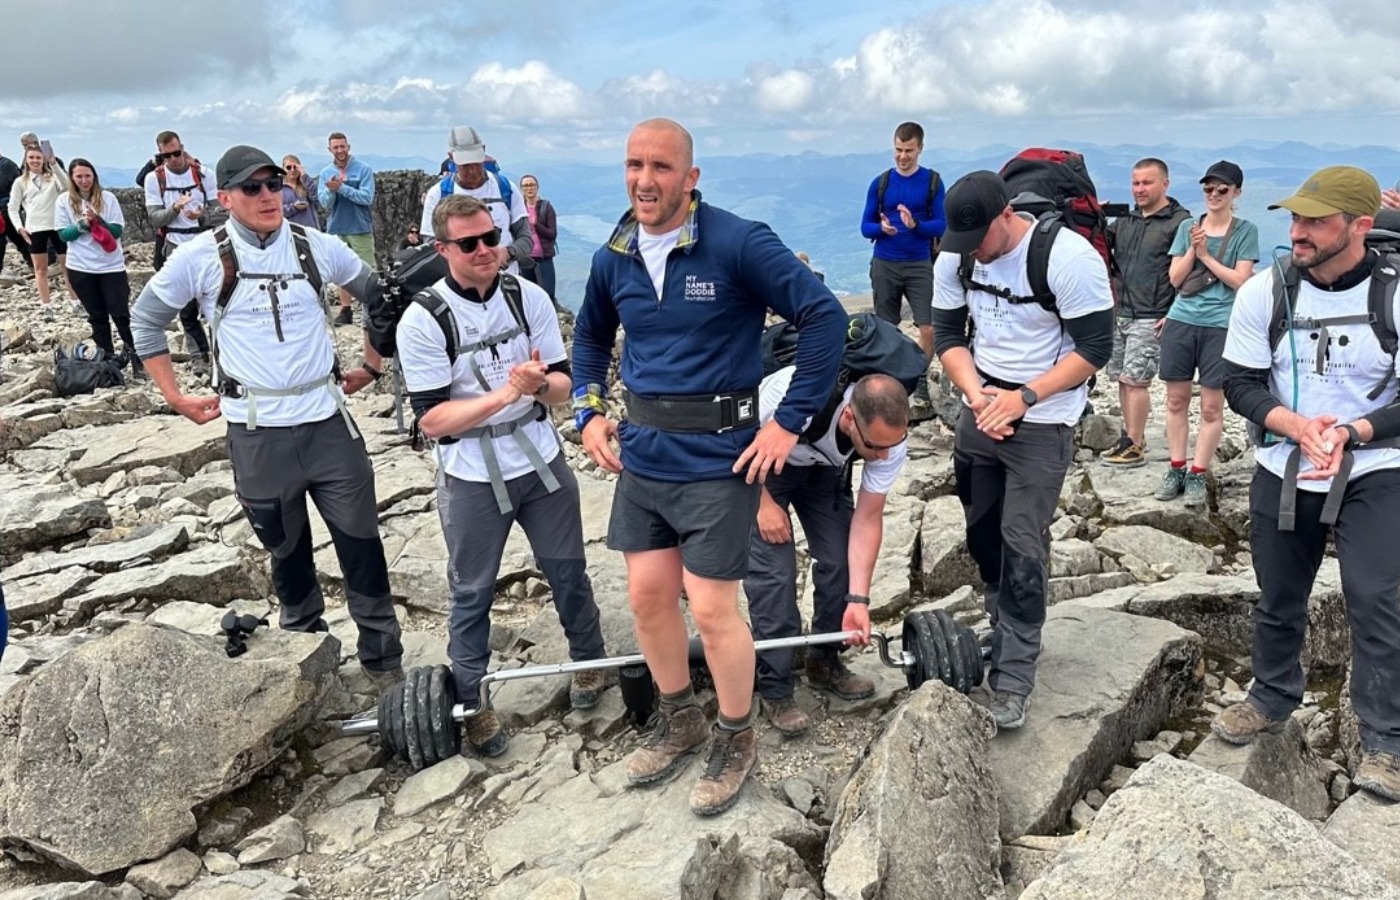 He reached the summit with the 100kg barbell after a climb of more than 16 hours